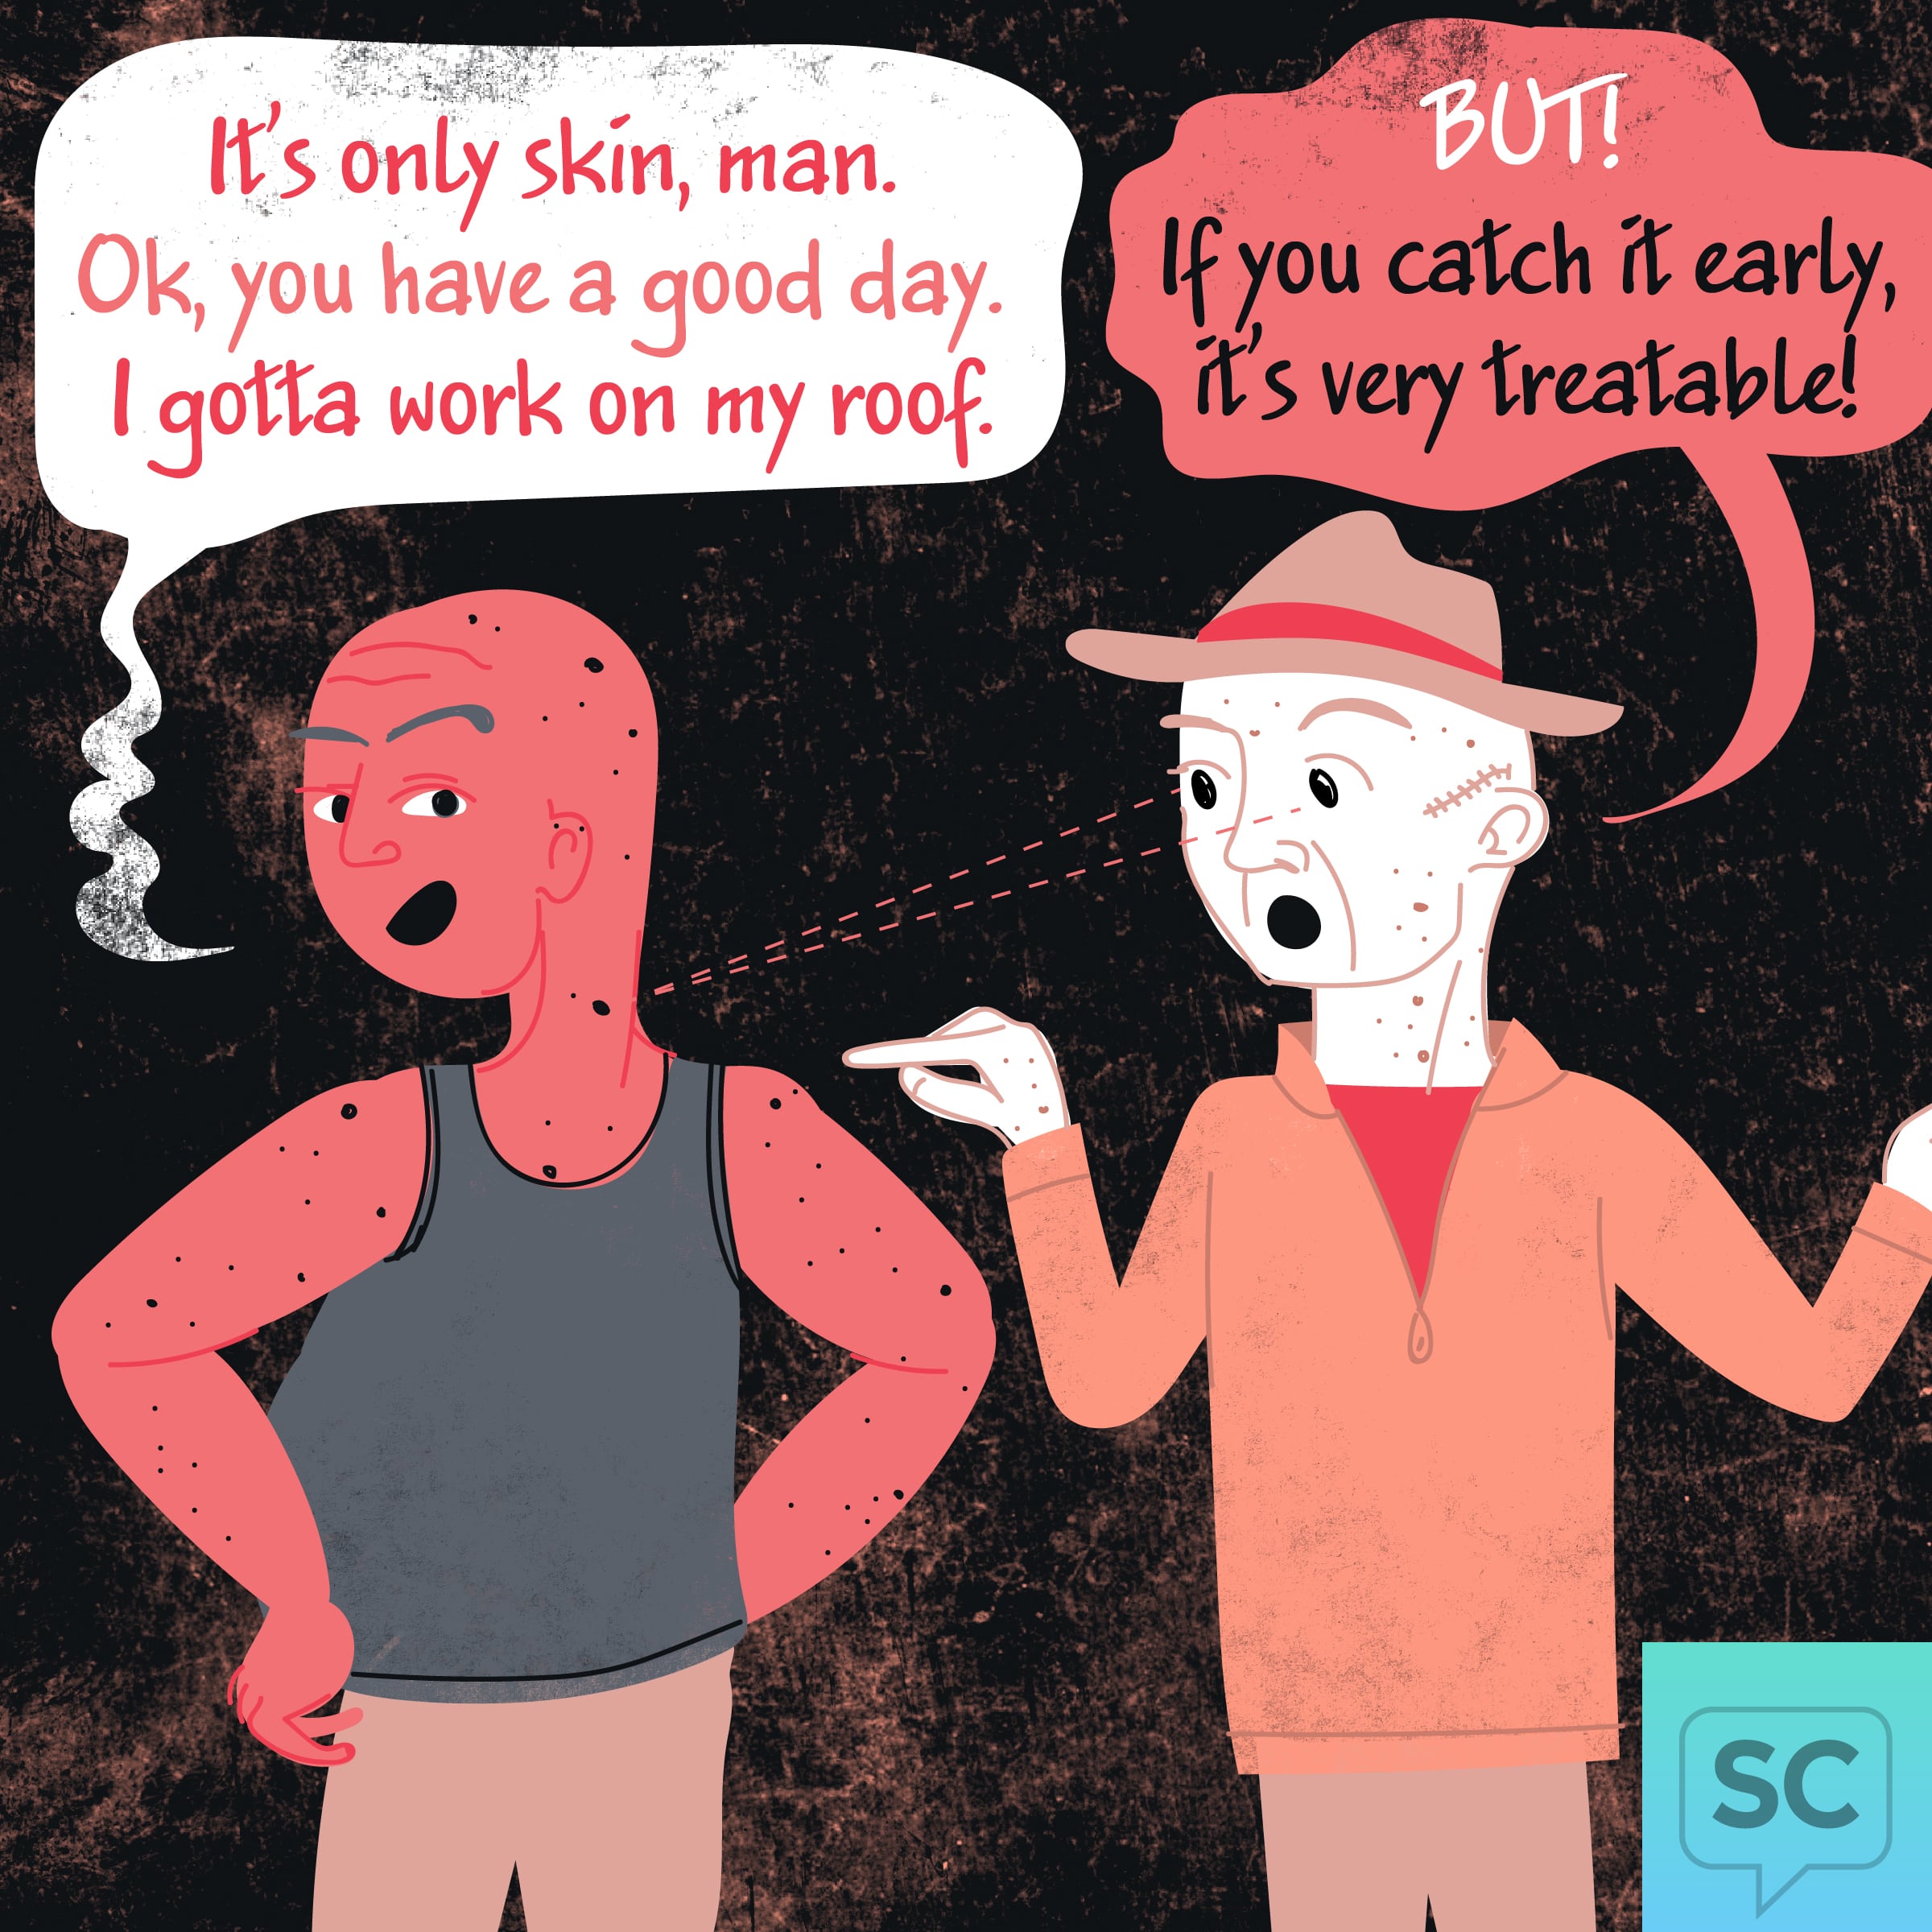 A man brushes off the advice of another about skin safety.